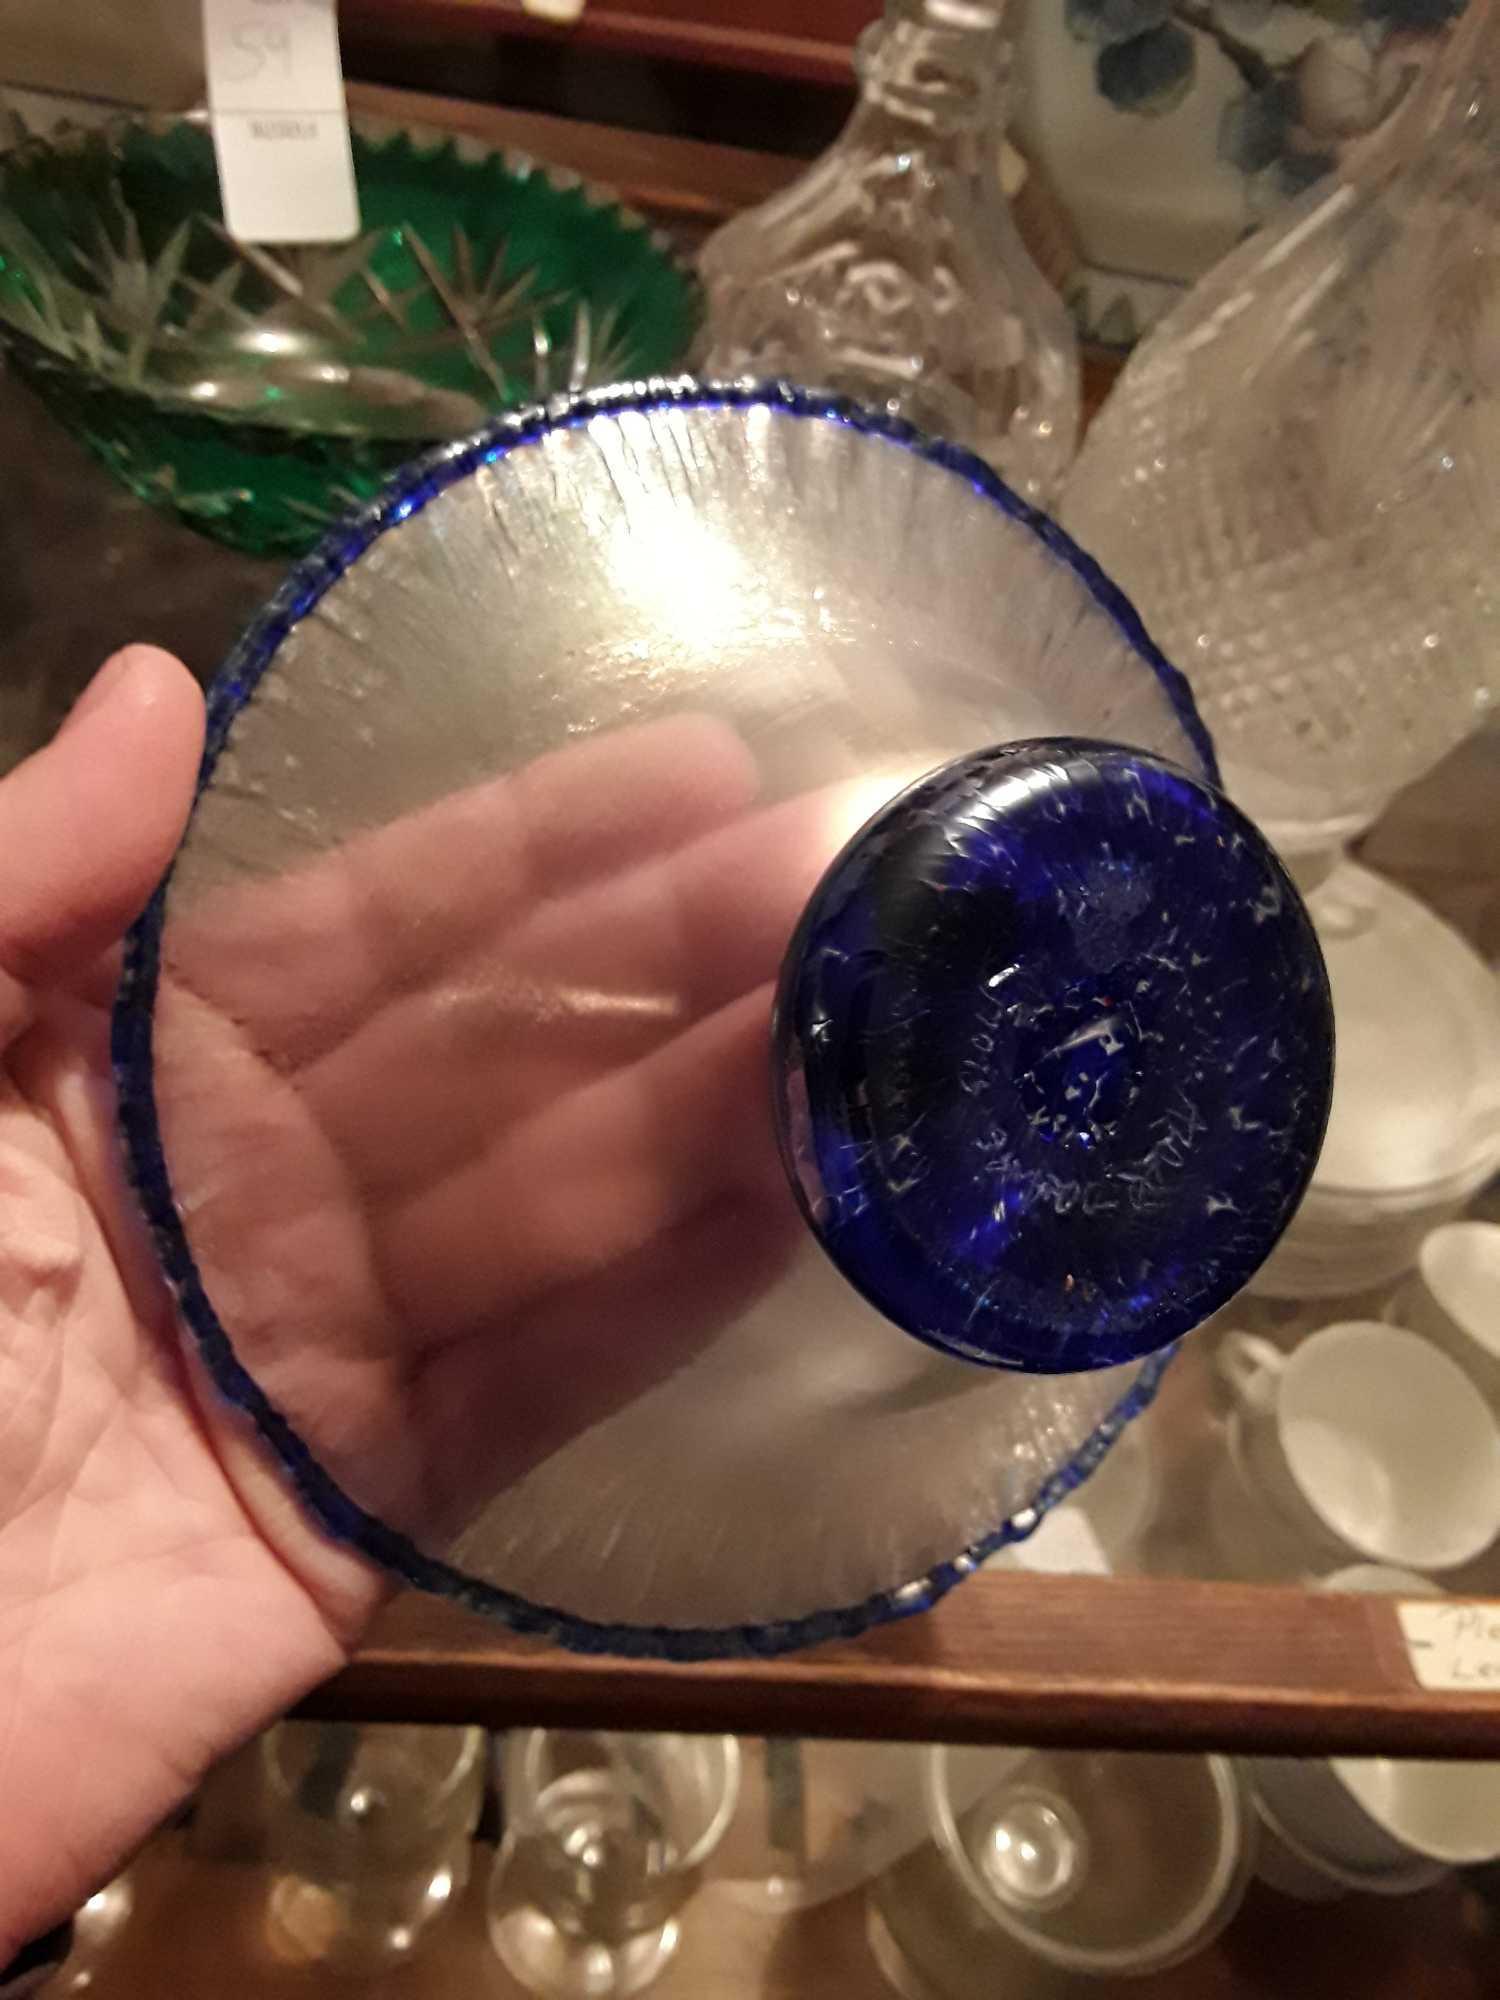 Glowing Green Glass Cup and Blue and White DEcor Bowl